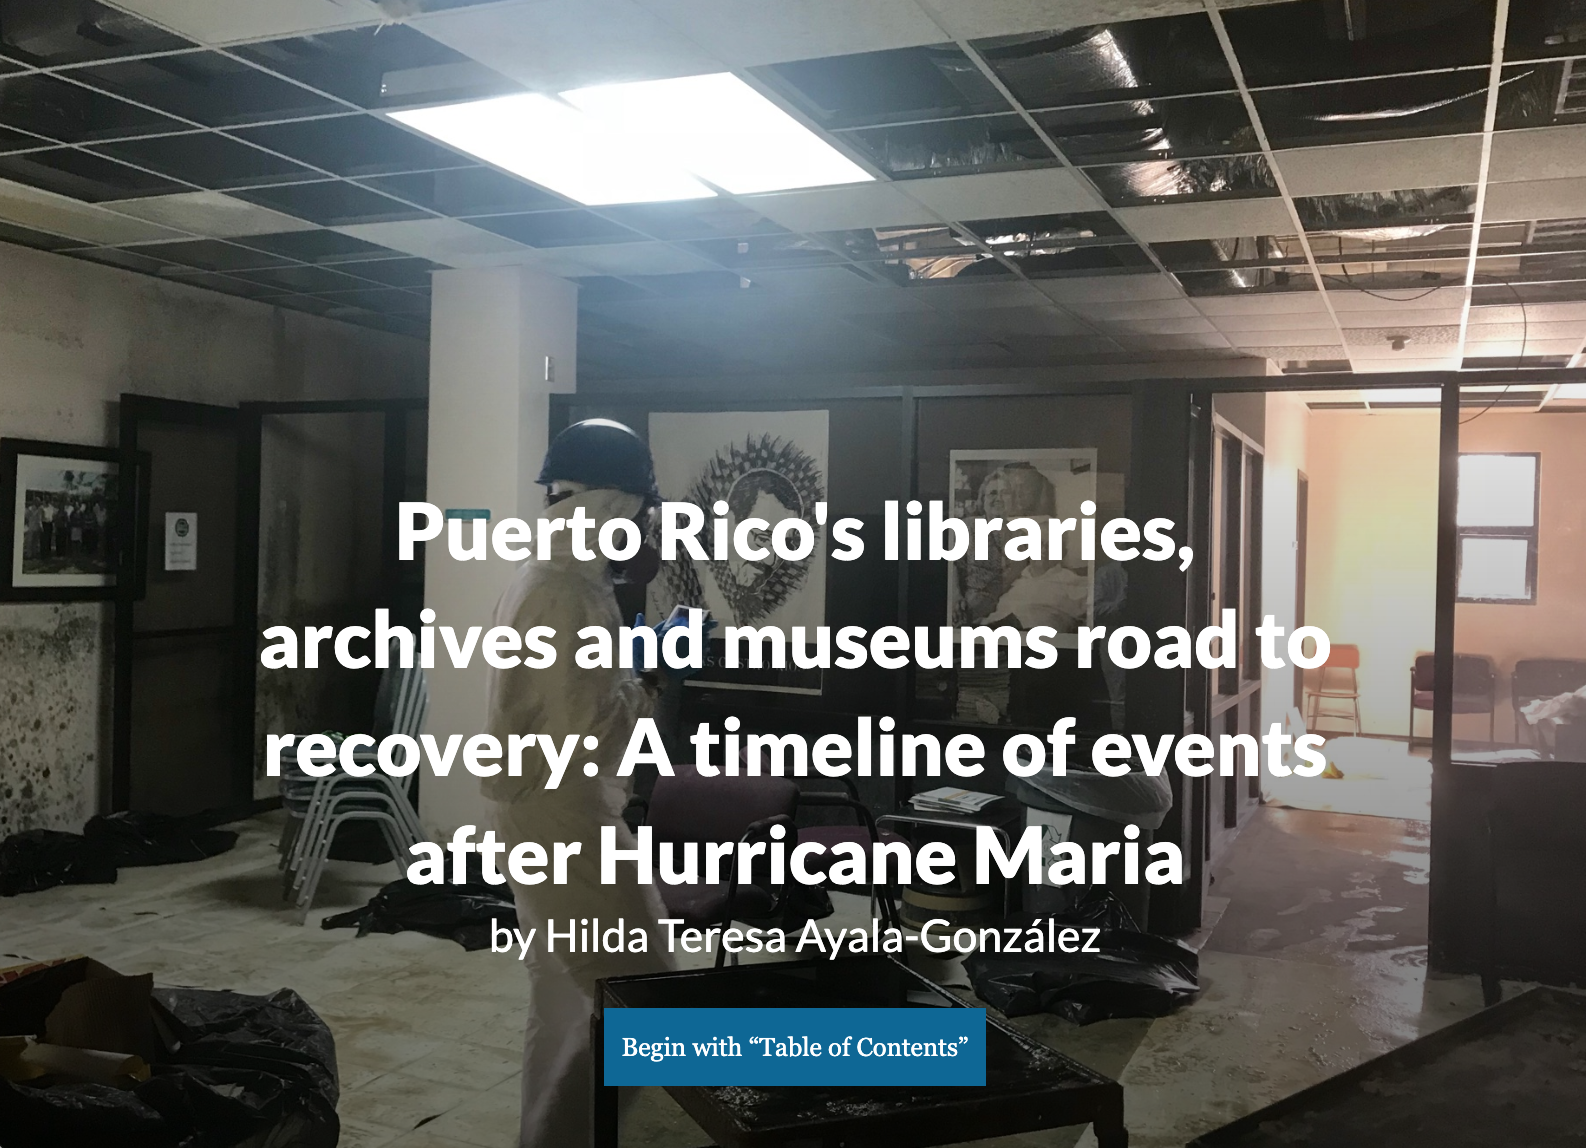 Puerto Rico's libraries, archives and museums' road to recovery: A timeline of events after Hurricane Maria